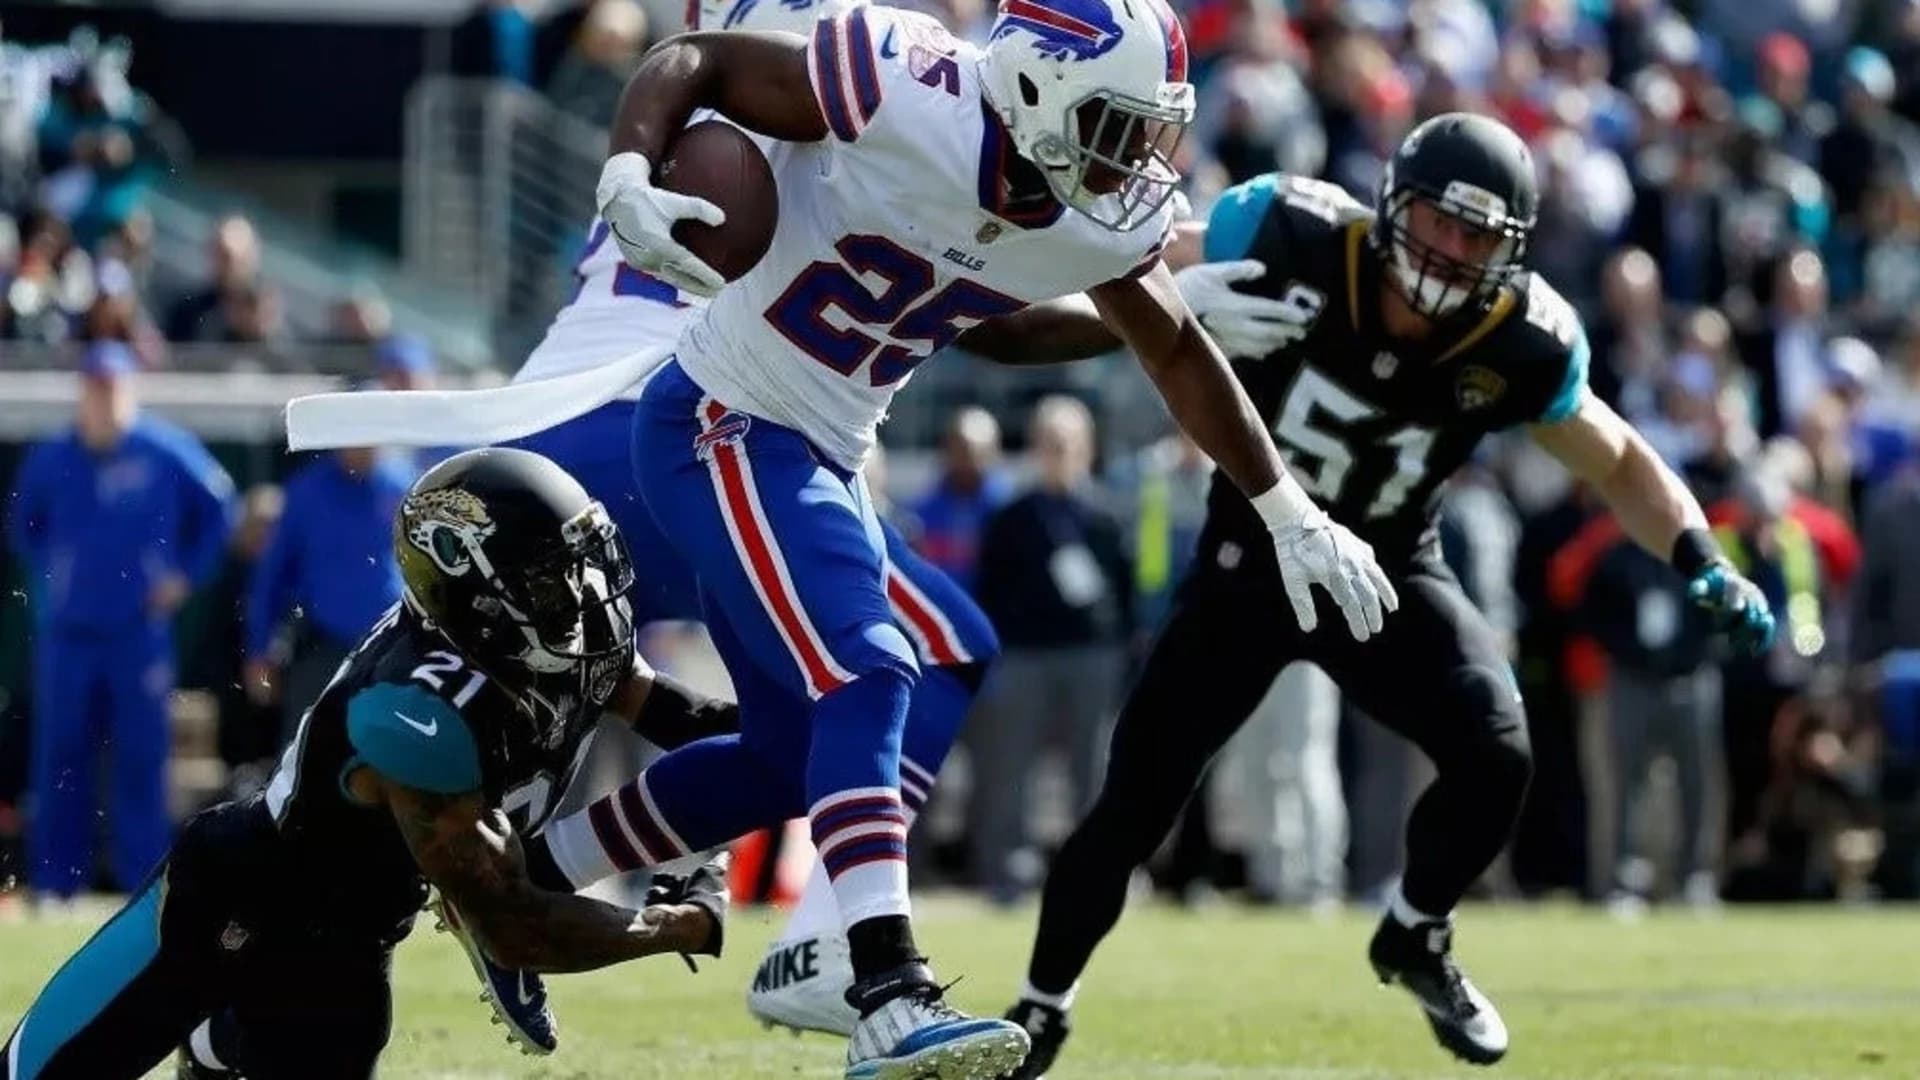 Lawyer: NFL star LeSean McCoy orchestrated assault of woman